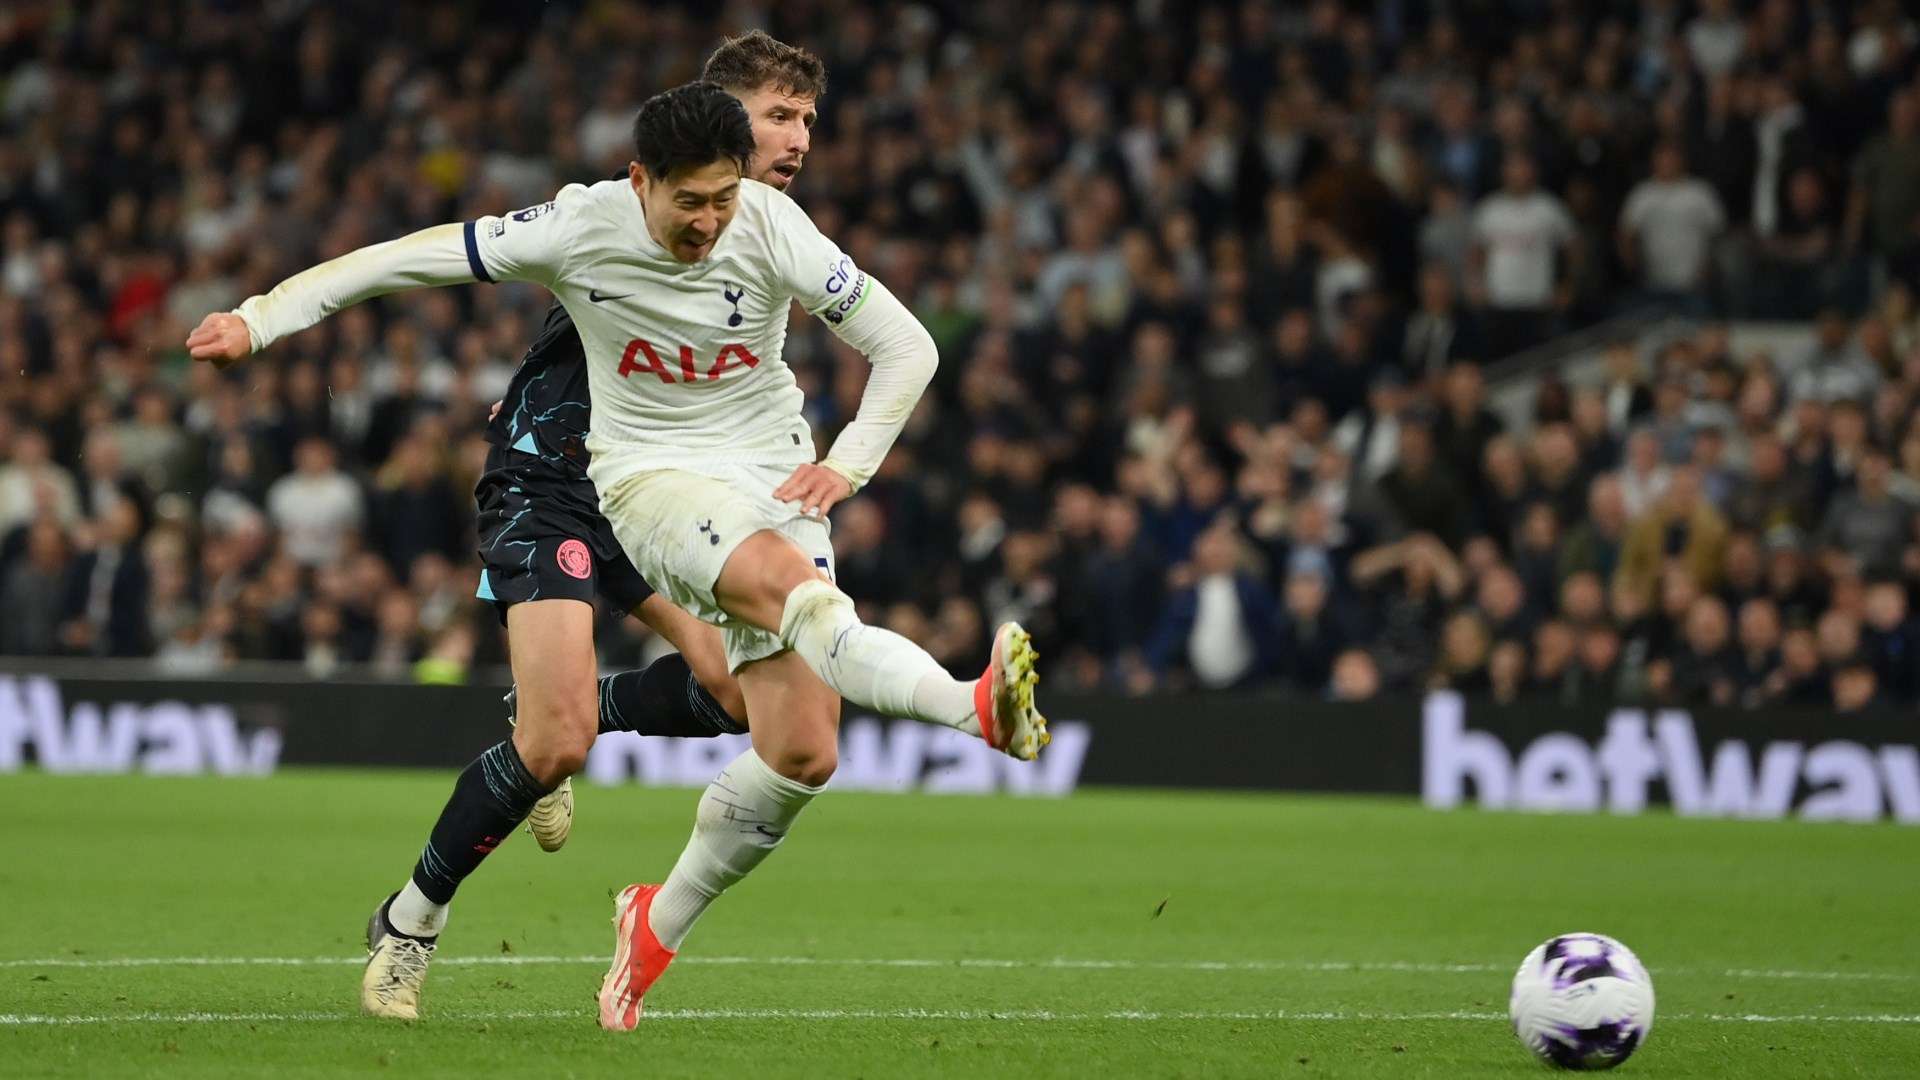 Mikel Arteta says he would have picked Heung-min Son to finish THAT chance vs Man City.